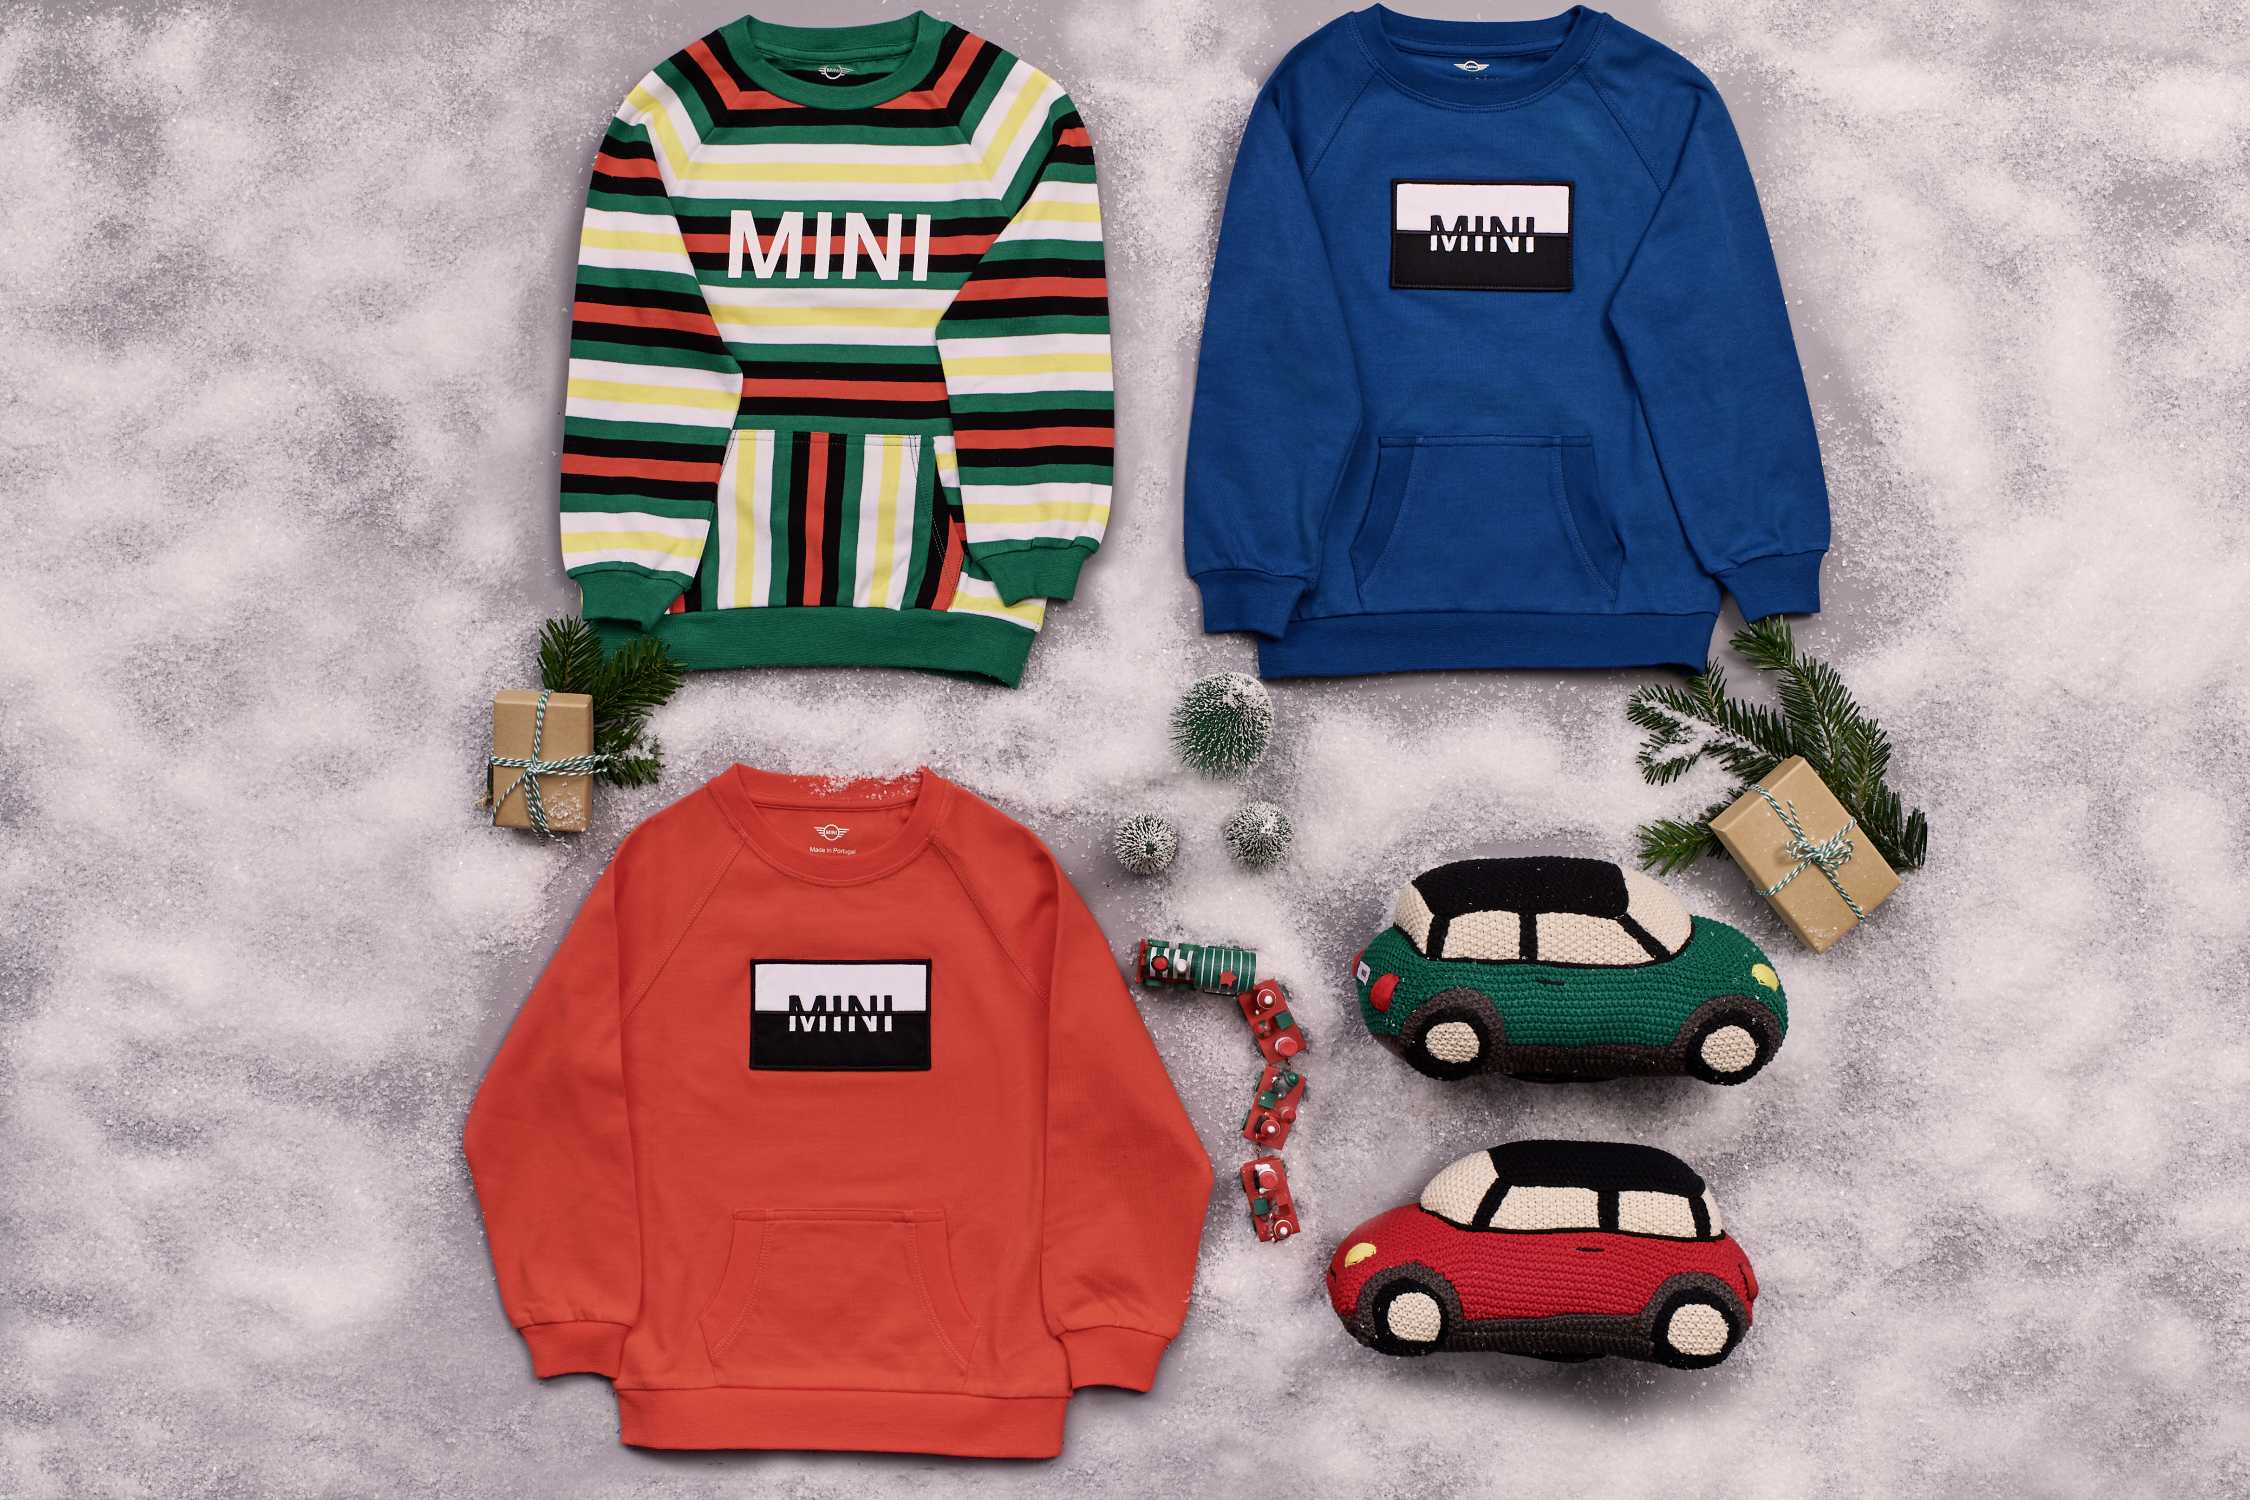 The MINI Lifestyle Collection. (11/2019)